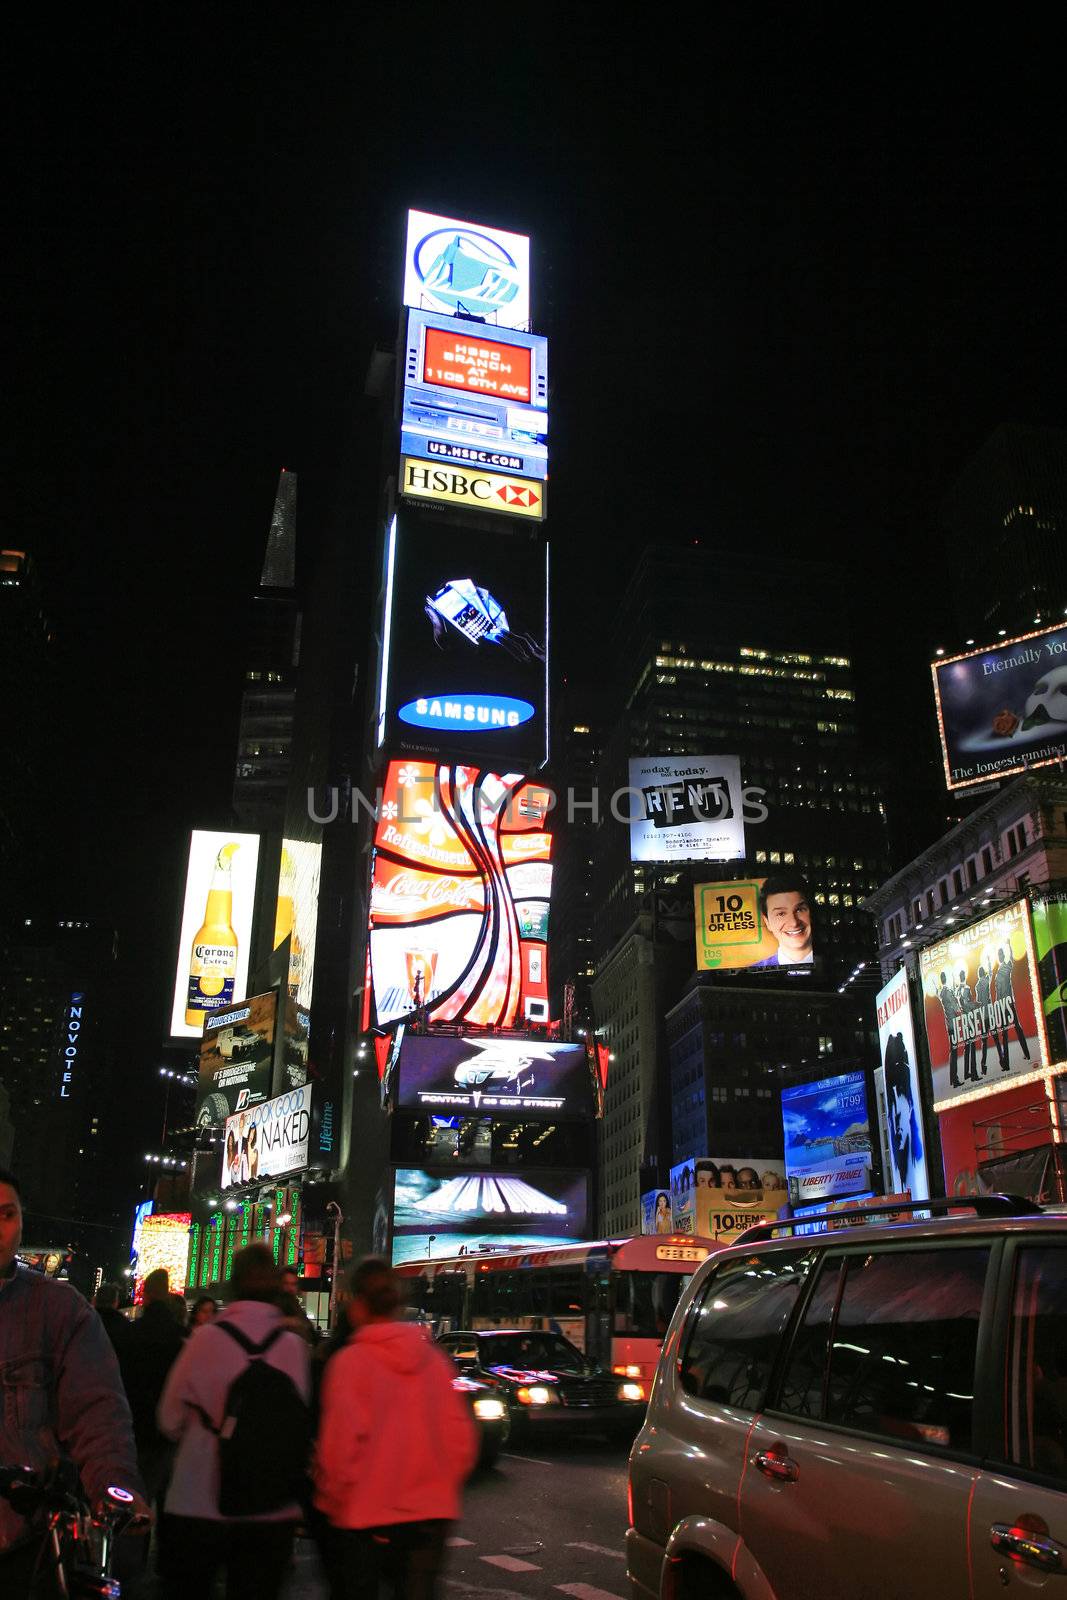 The Times Square in New York City at night